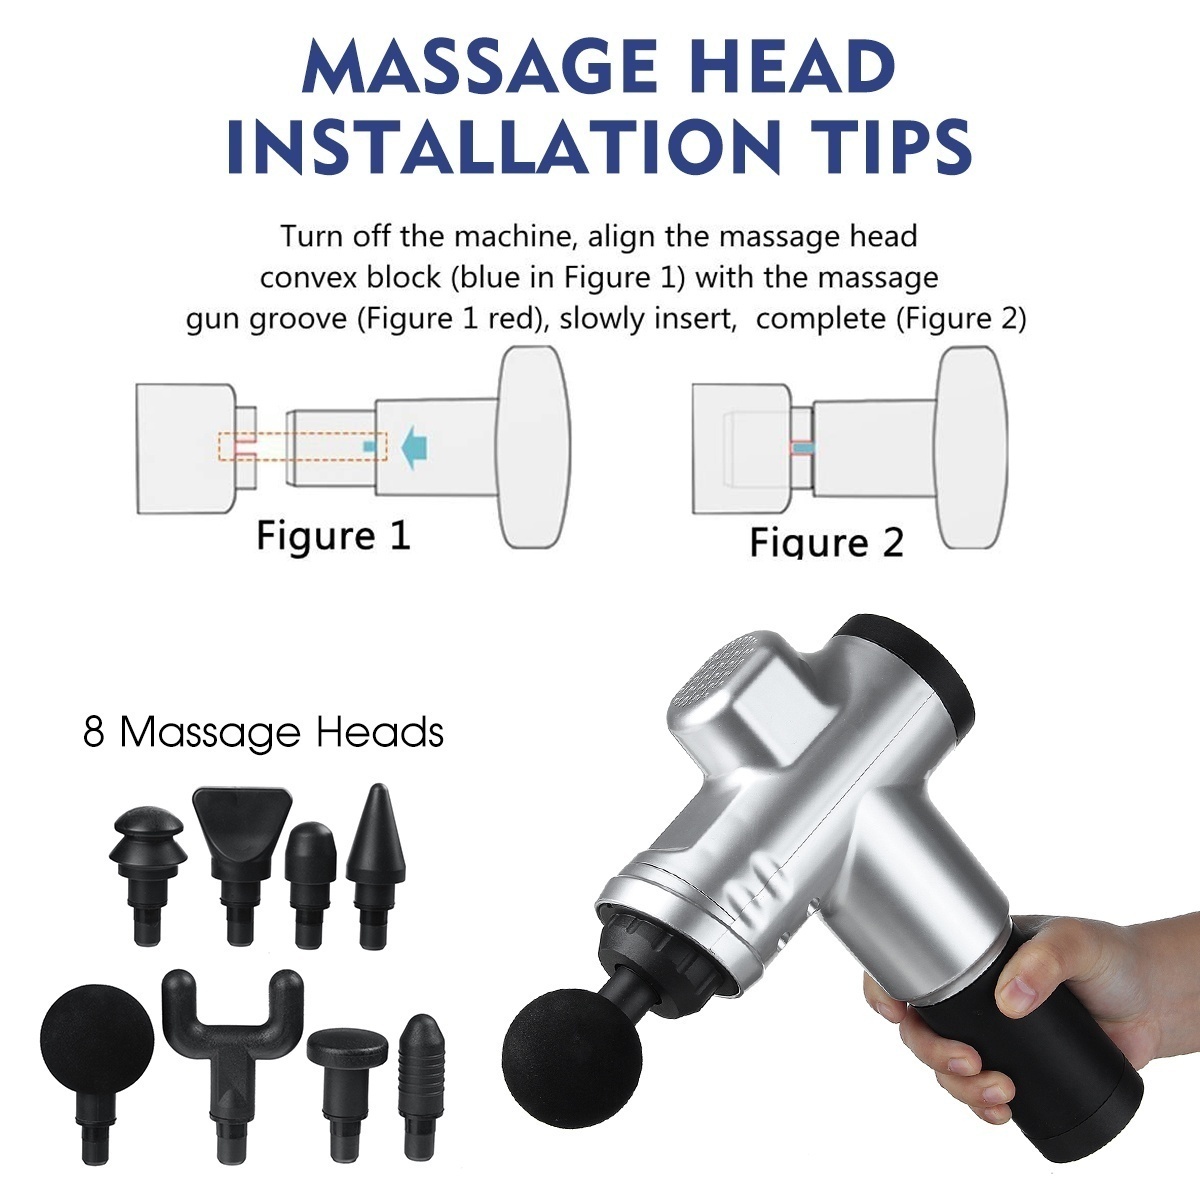 20-Gears-LED-USB-Electric-Percussion-Massager-Muscle-Vibrating-Pain-Relaxing-Therapy-Device-W-8-Head-1733315-6